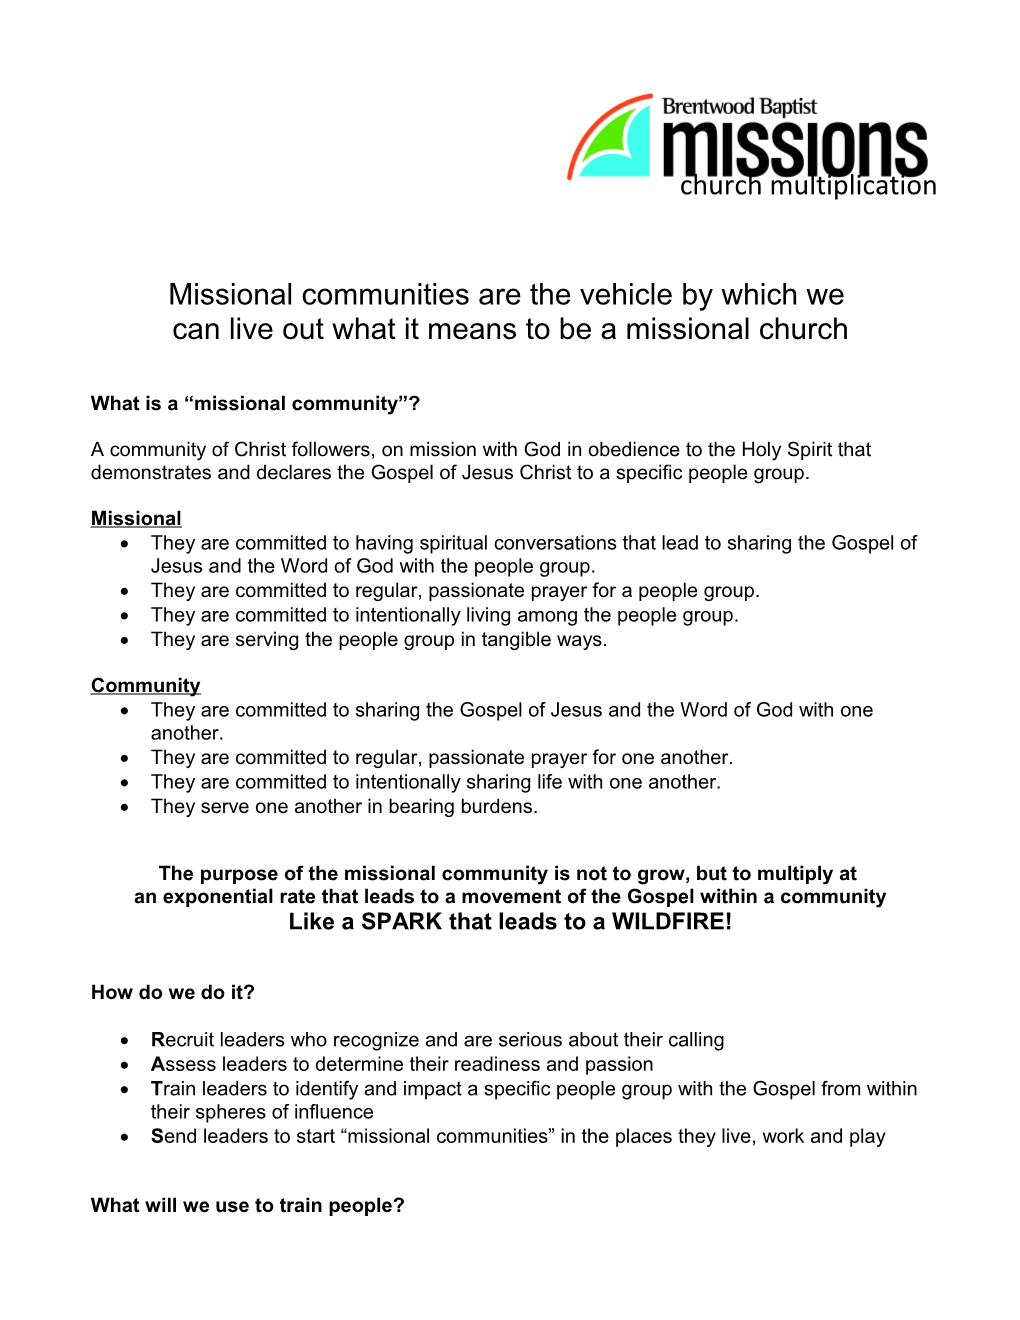 What Is a Missional Community